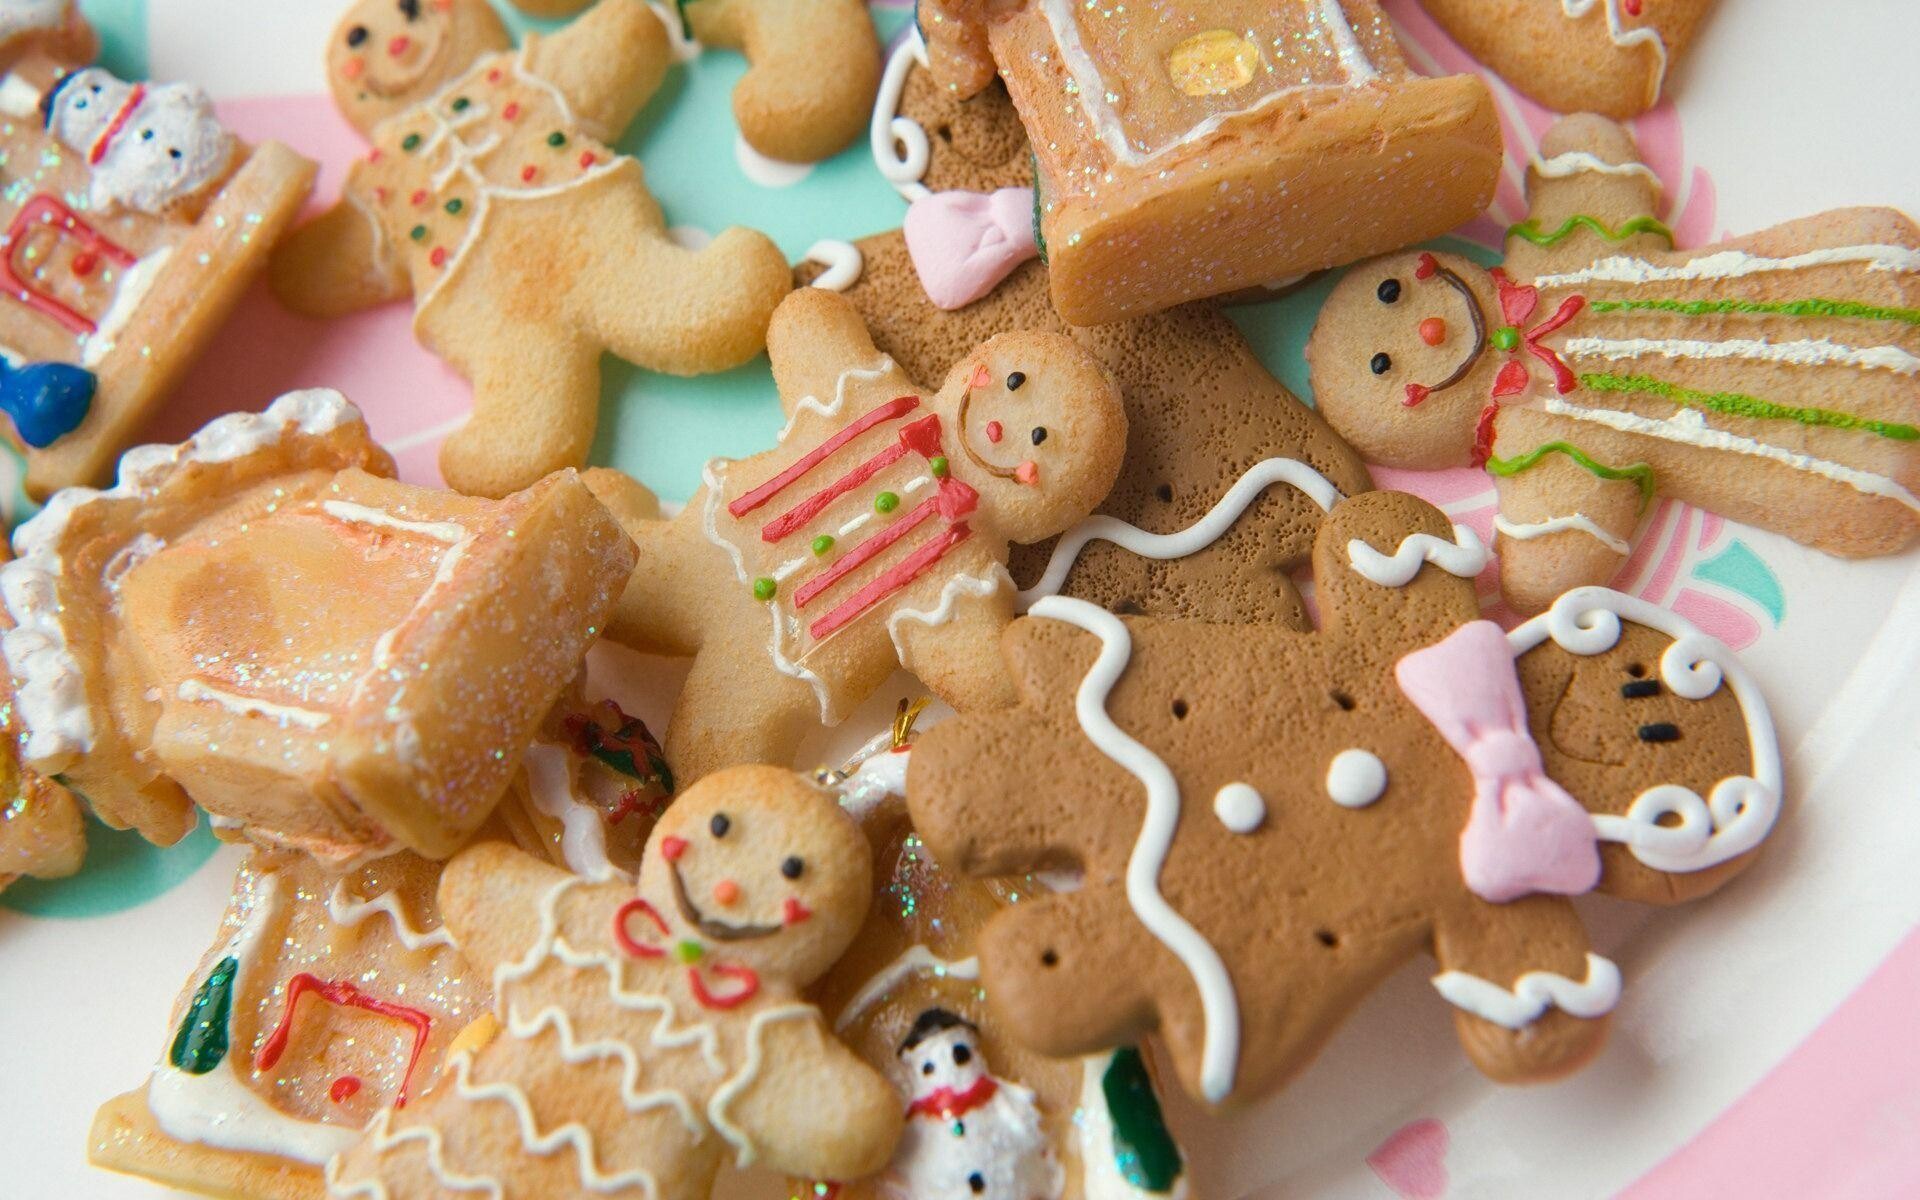 Gingerbread House: Gingerbread men, Confectionery decoration, Icing, Baked goods, Gingersnap cookies. 1920x1200 HD Background.